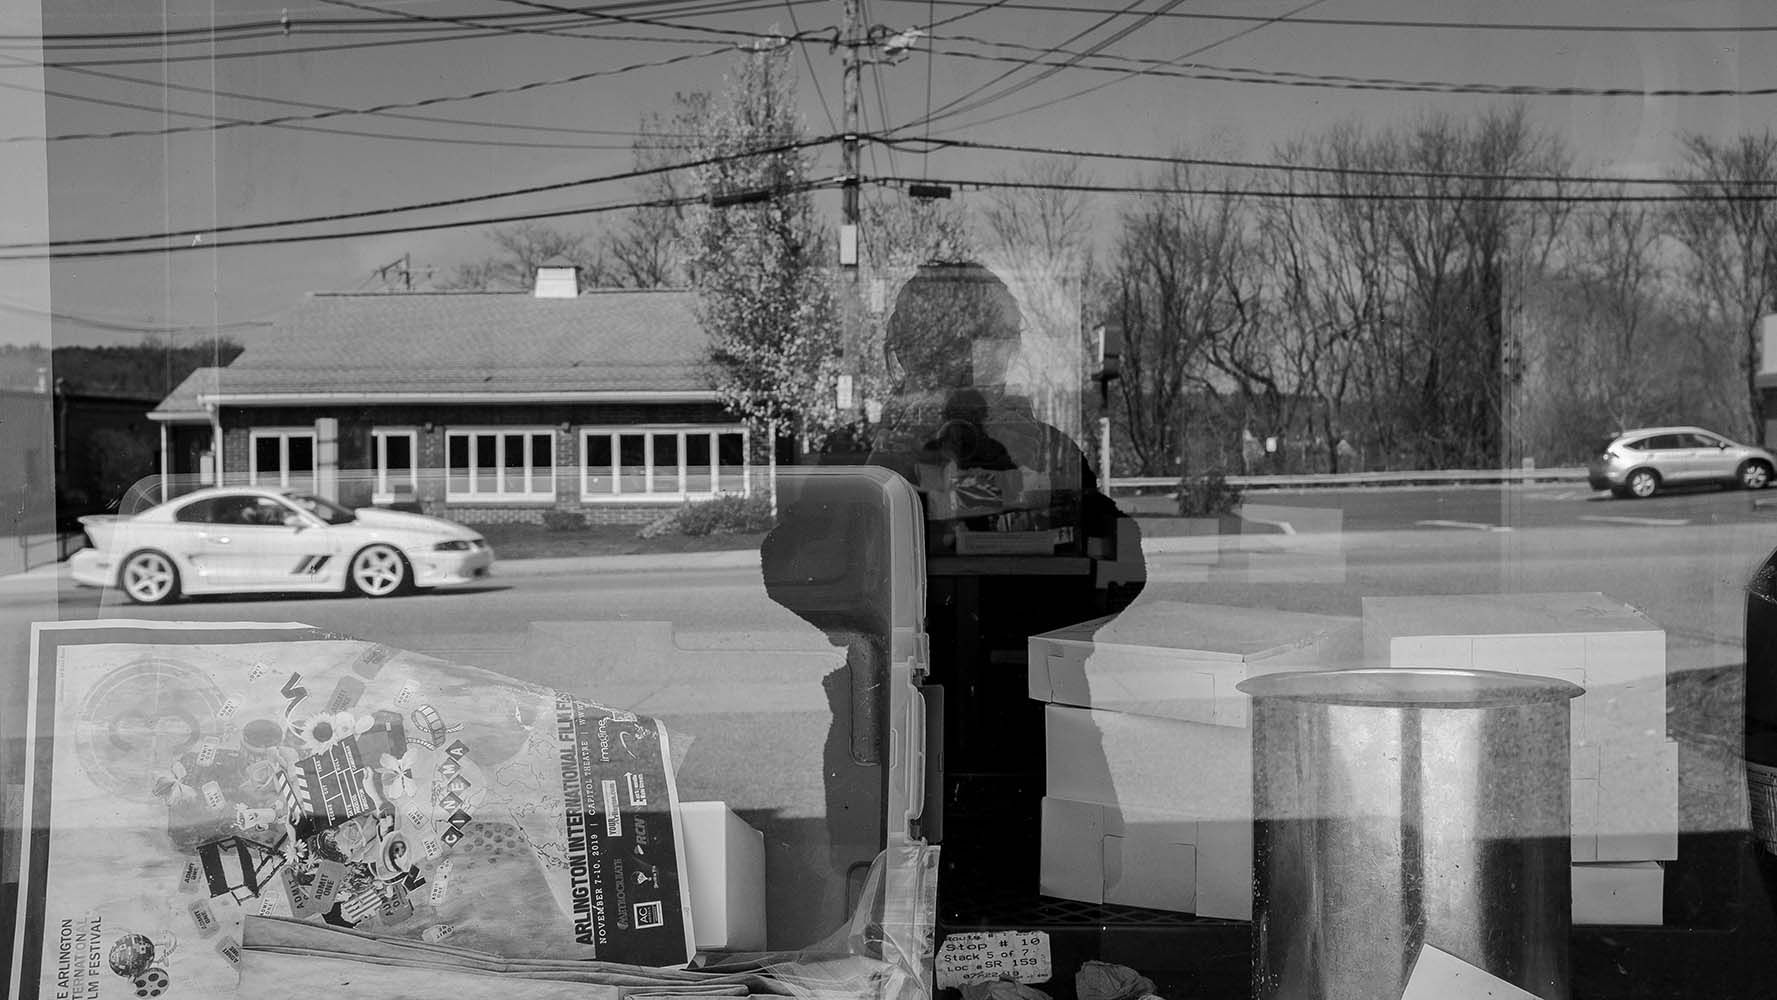 reflections in window with self portrait and car